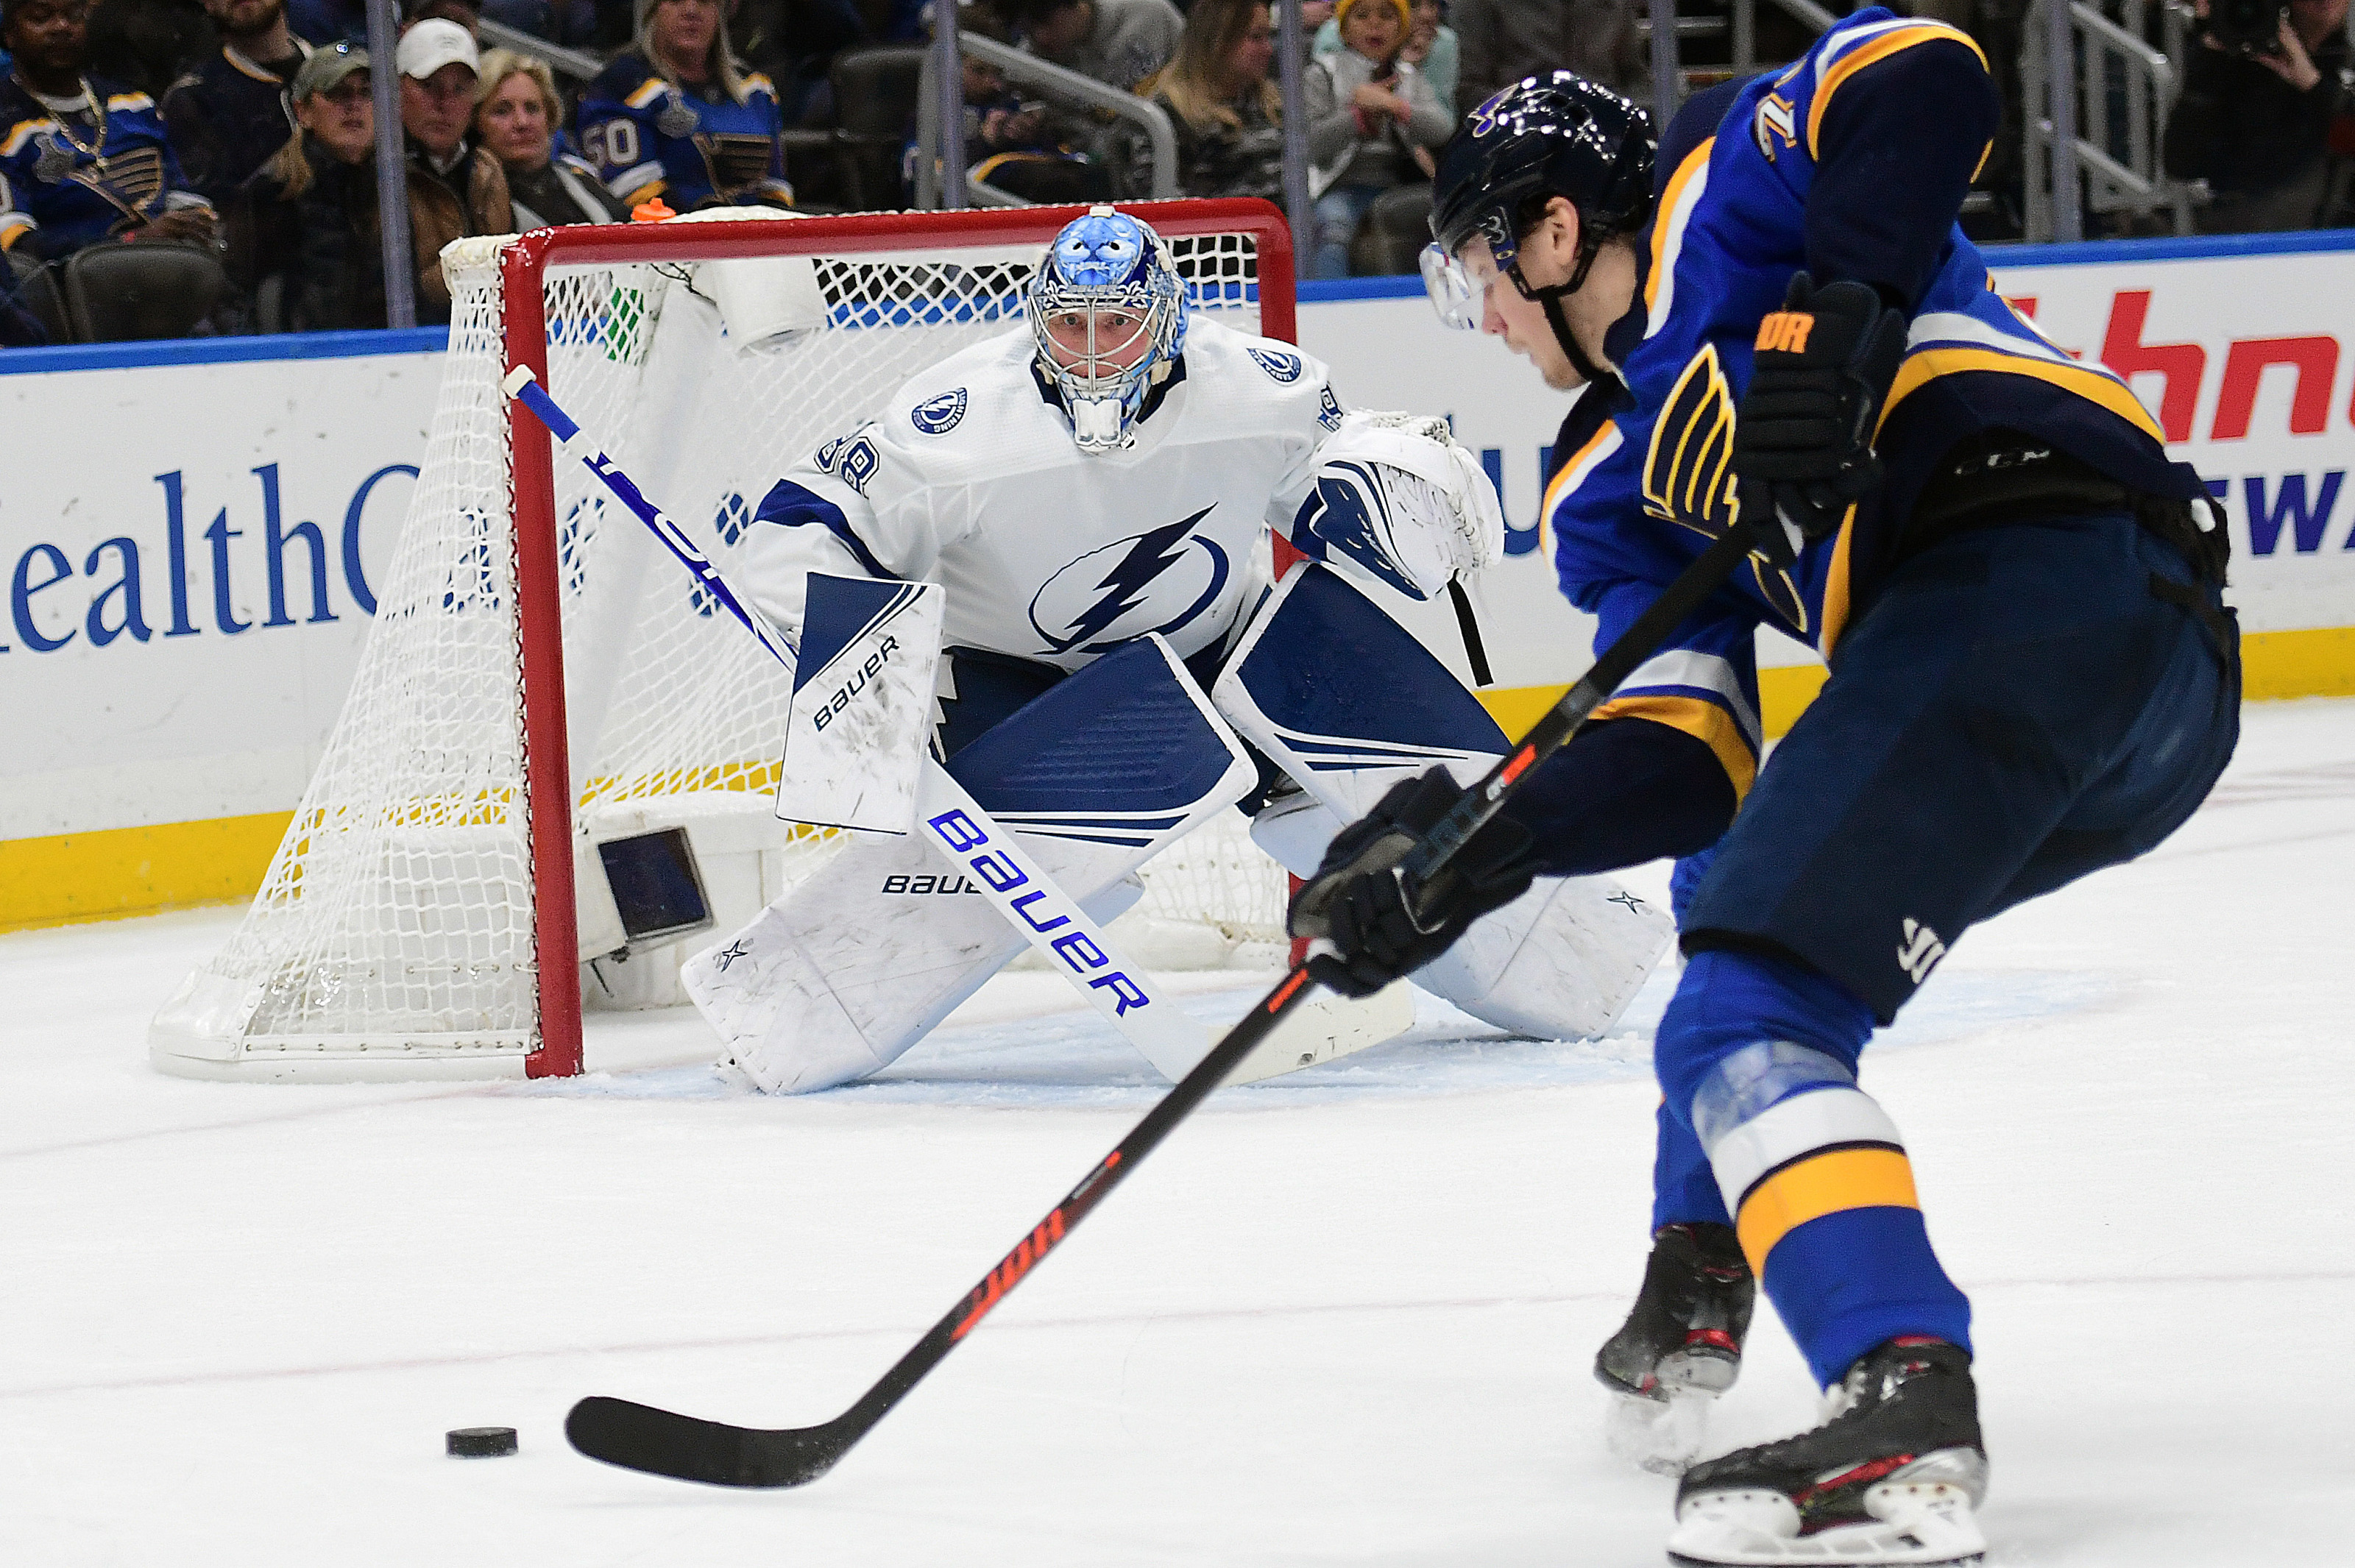 Brayden Schenn of the St. Louis Blues skates with the puck during the  News Photo - Getty Images